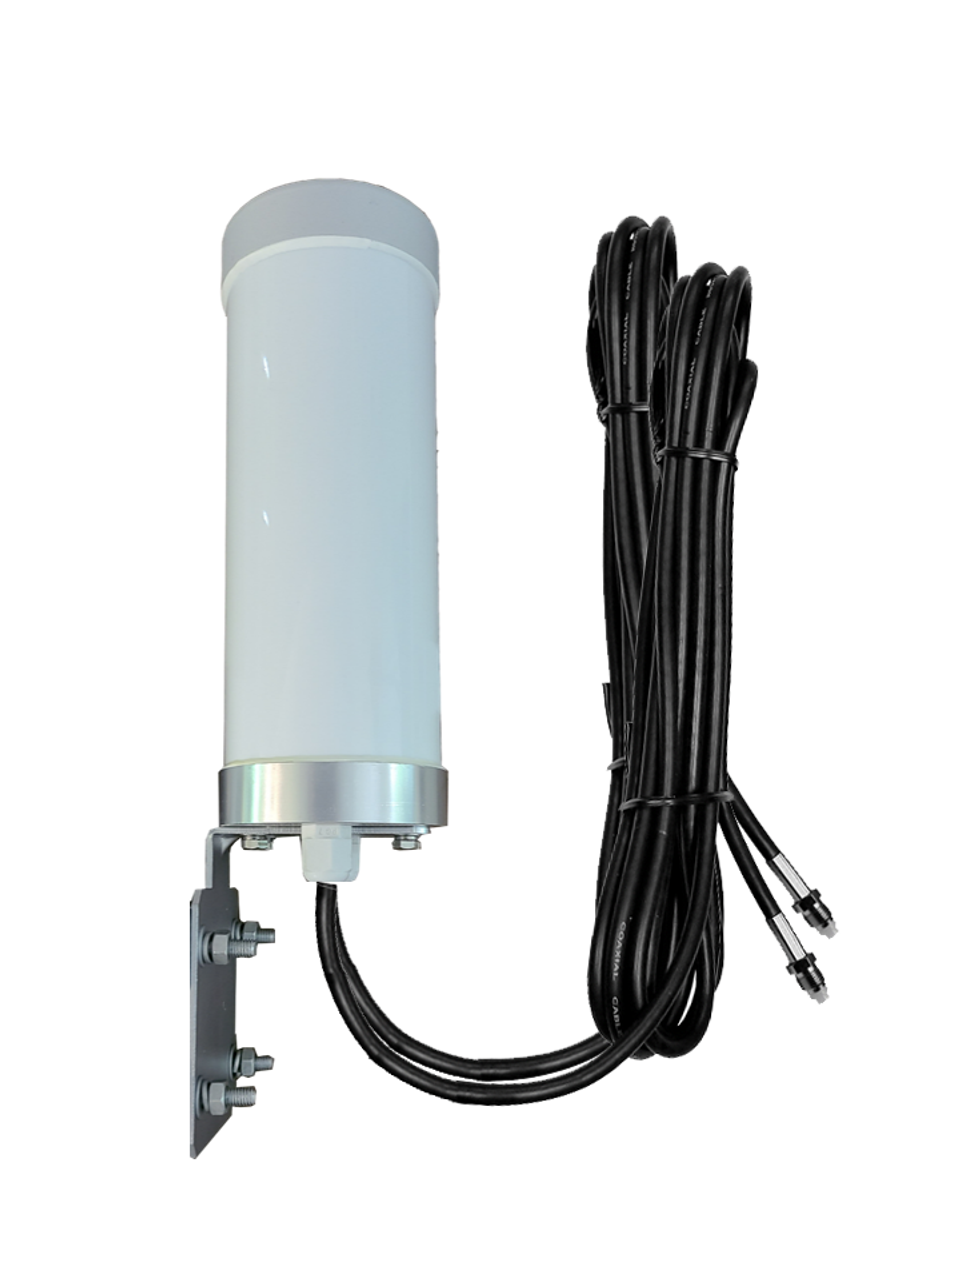 M29 Omni Directional MIMO 2 x Cellular 4G LTE CBRS 5G NR M2M IoT Bracket Mount Antenna w/2 x 16ft Coax Cables FME Female